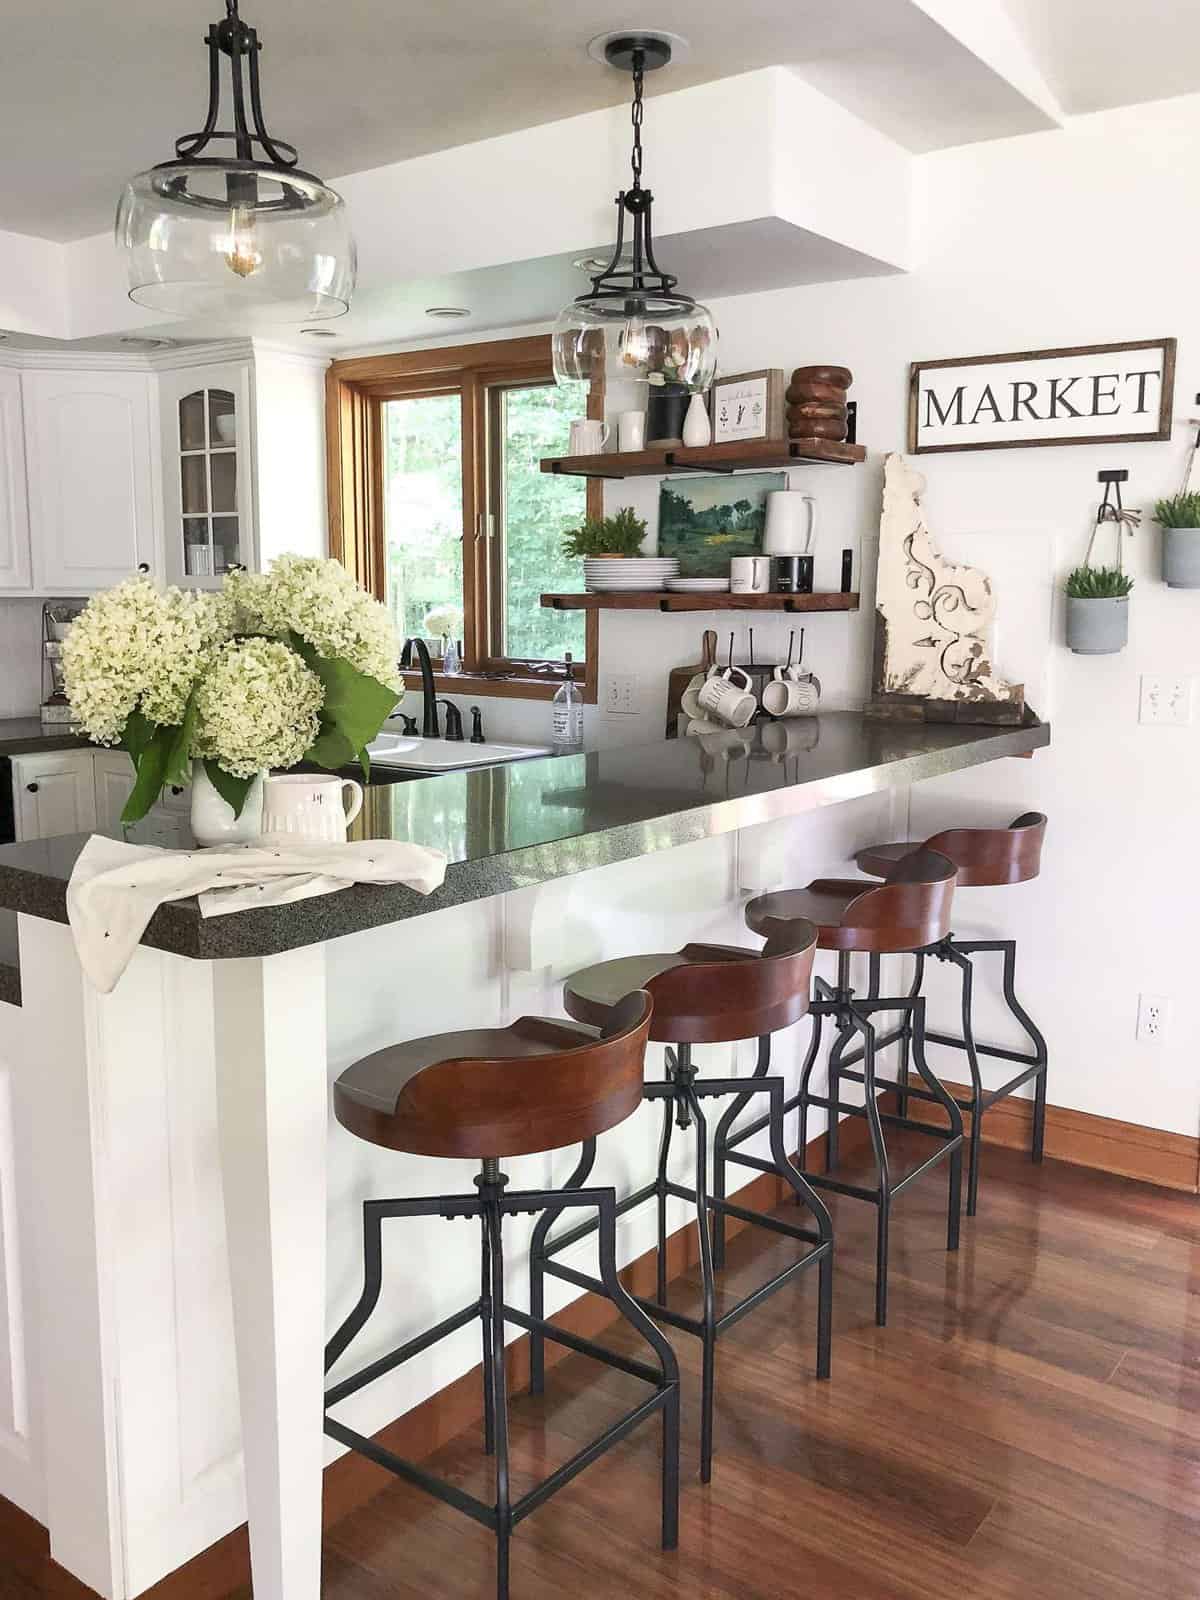 Kitchen Remodel on a Budget | The final reveal of our budget friendly kitchen remodel along with a DIY pendant makeover and beautiful kitchen decor ideas.